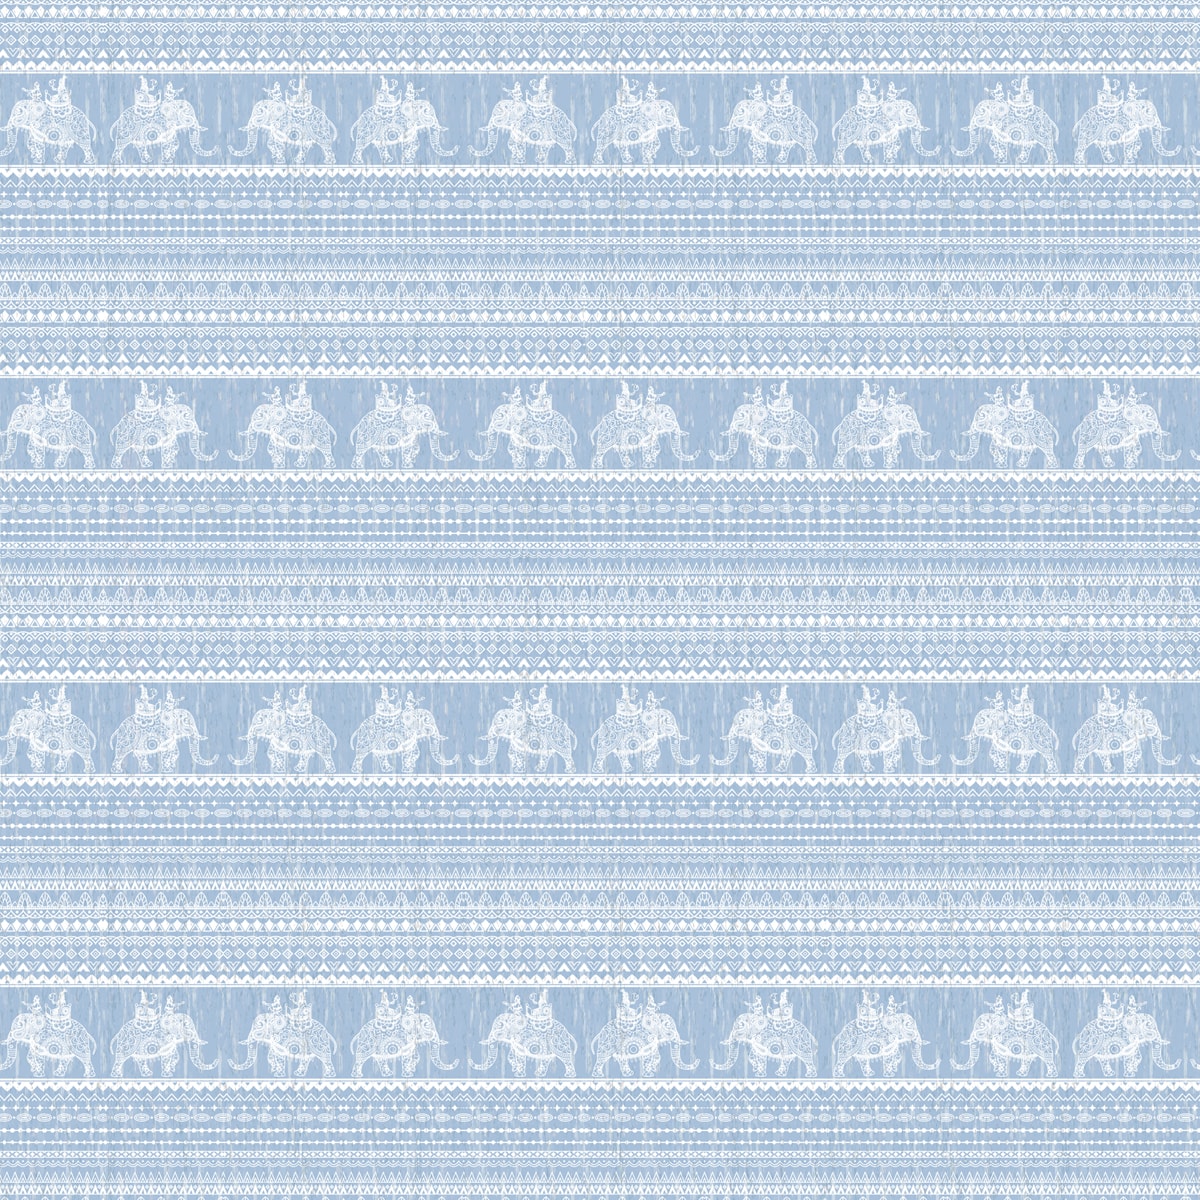 Blue Indian Fabric Look with Elephants Wallpaper